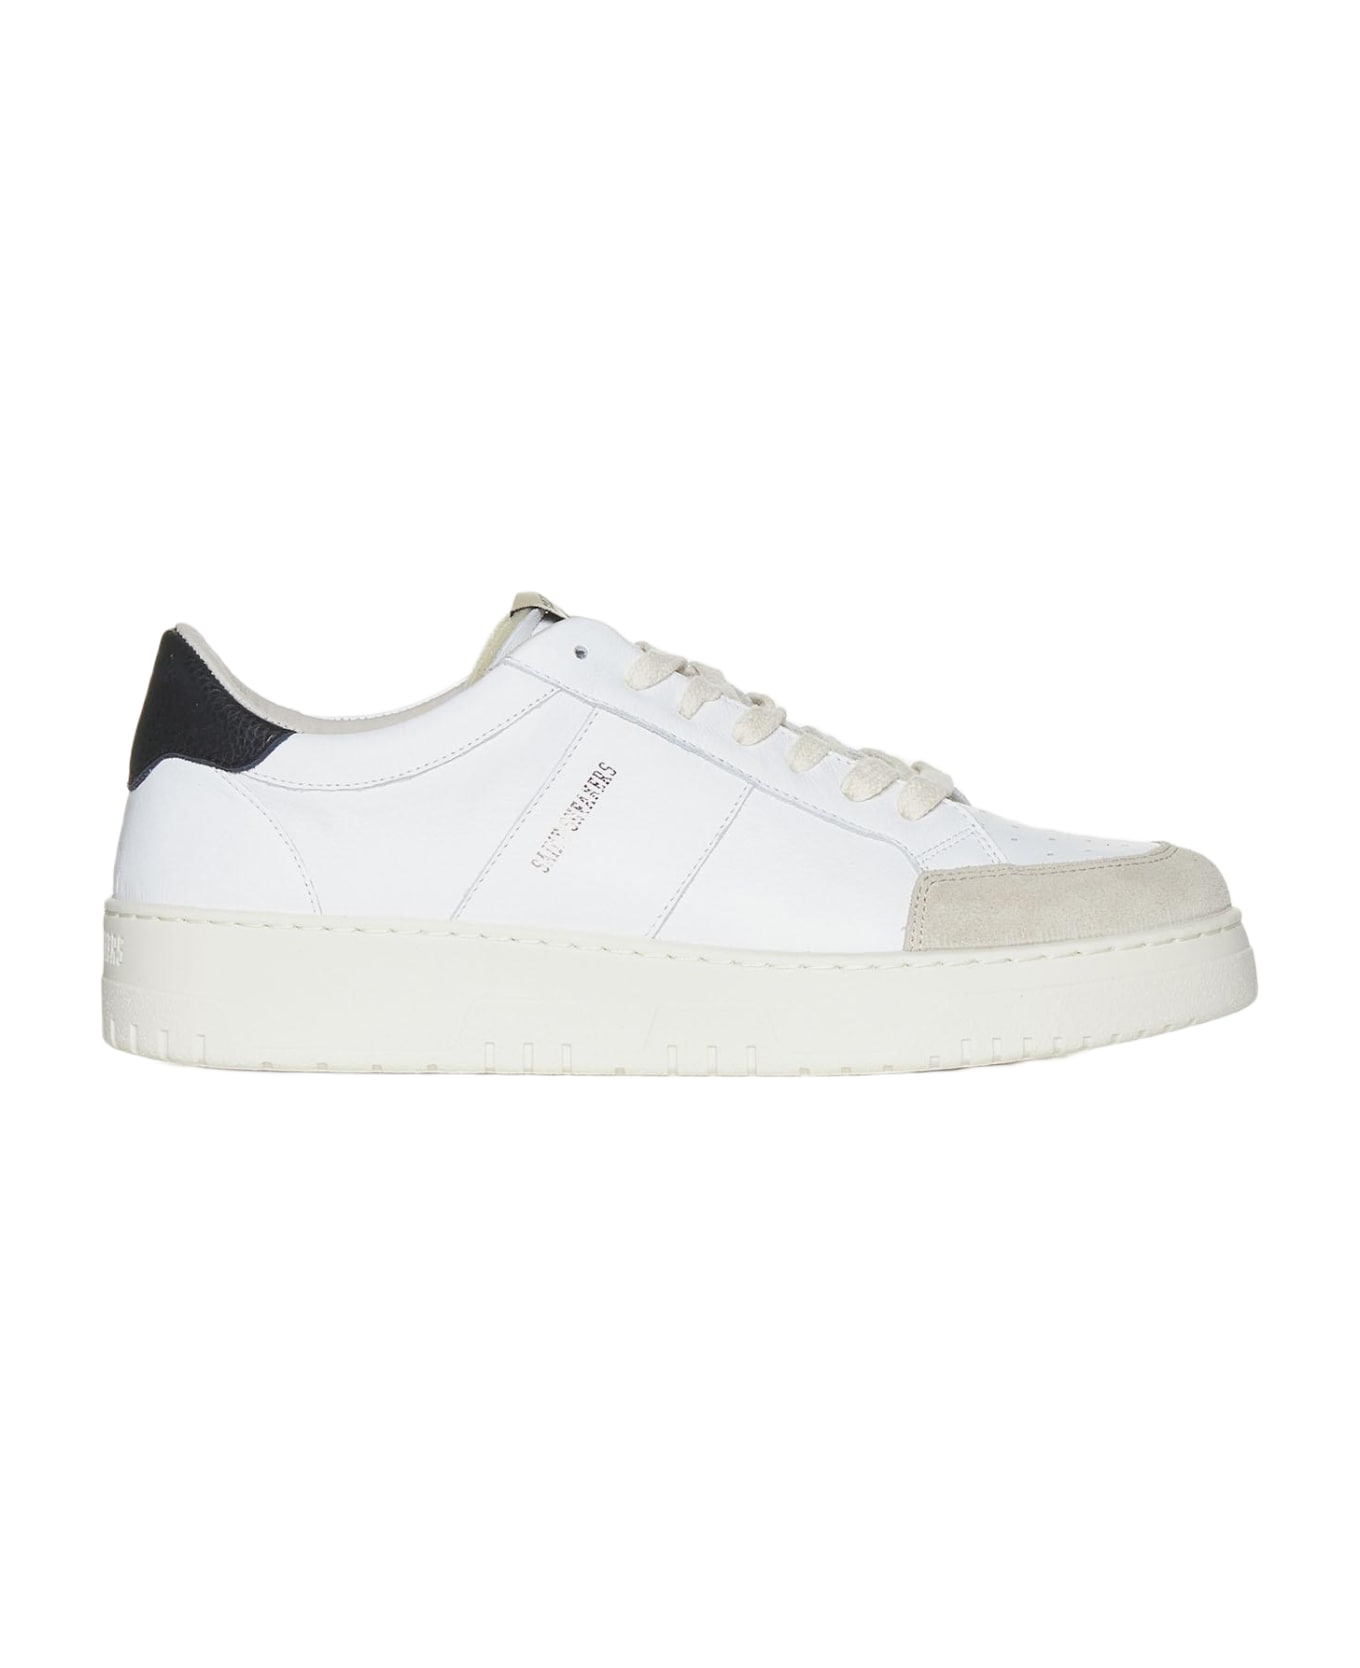 Saint Sneakers Sail Leather Sneakers - Multicolor スニーカー